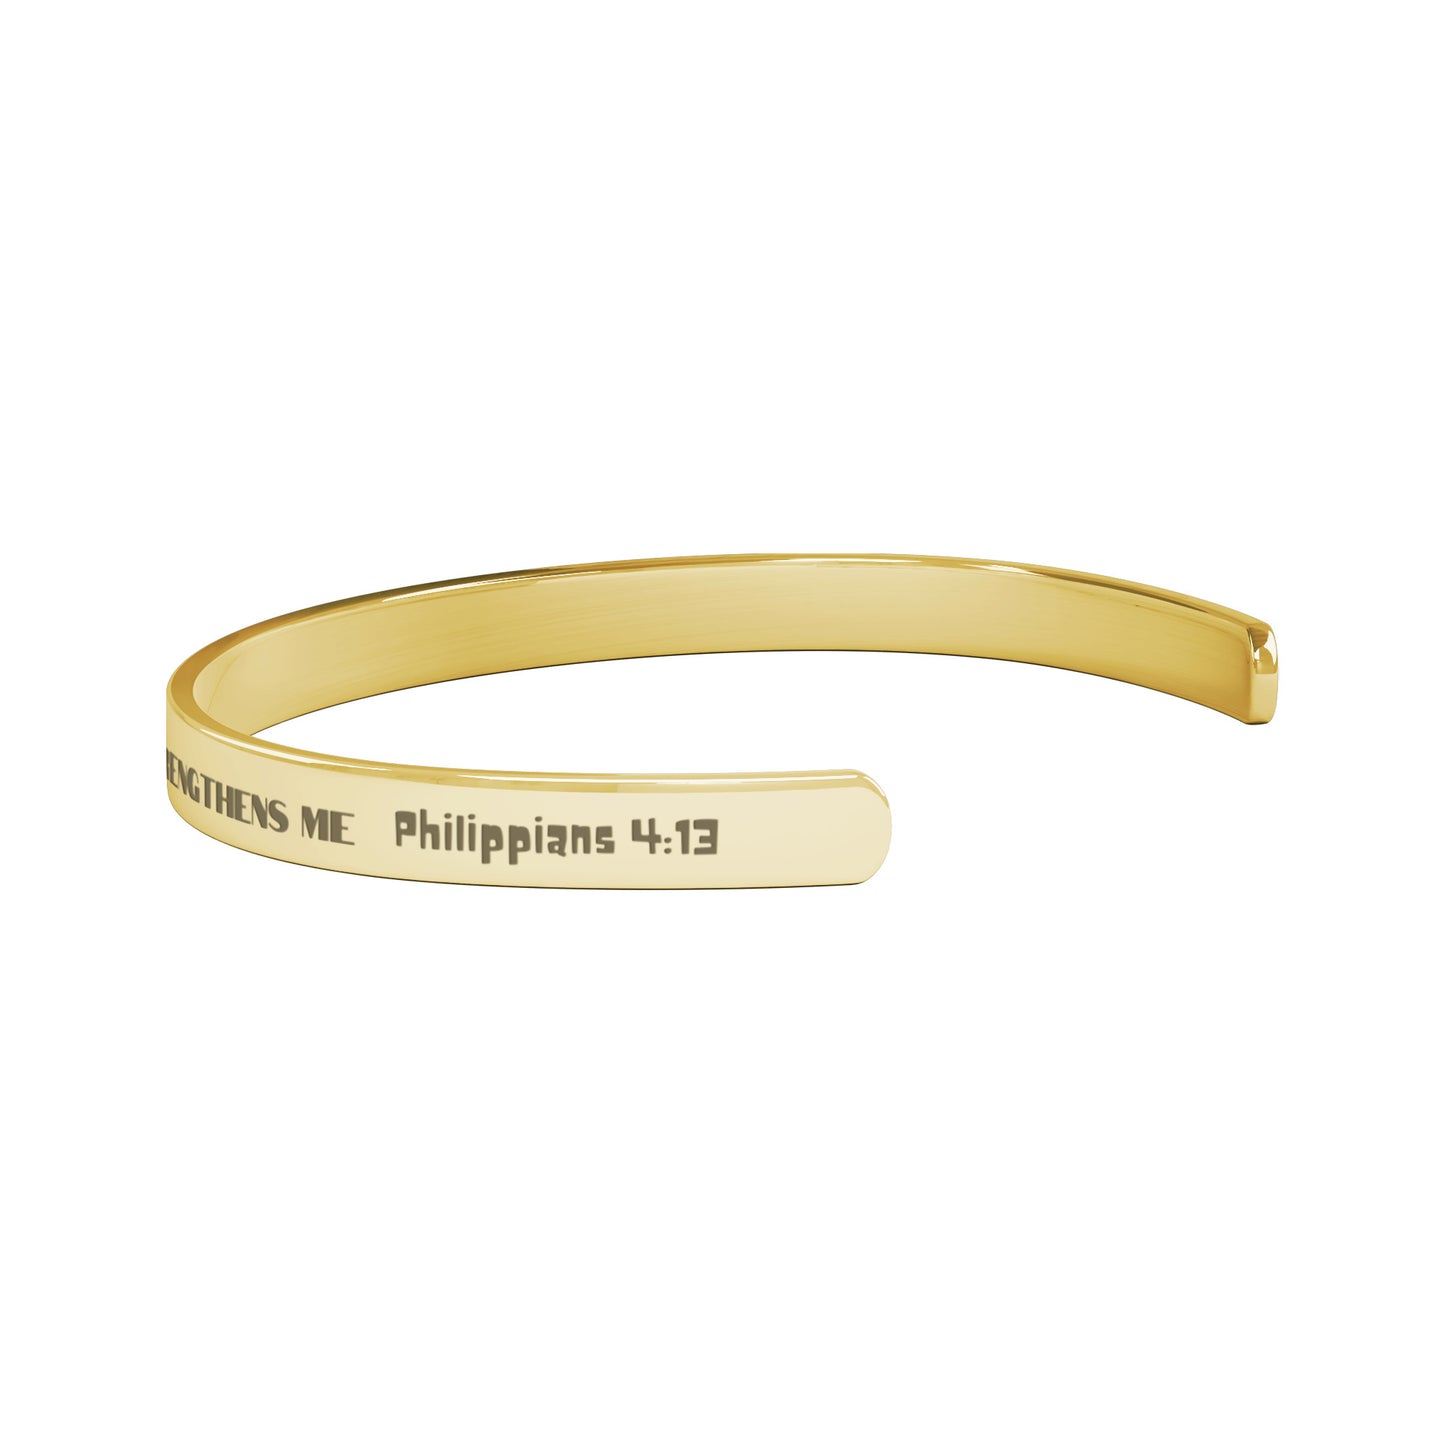 I can do all things through Christ who strengthens me| Cuff Bracelet